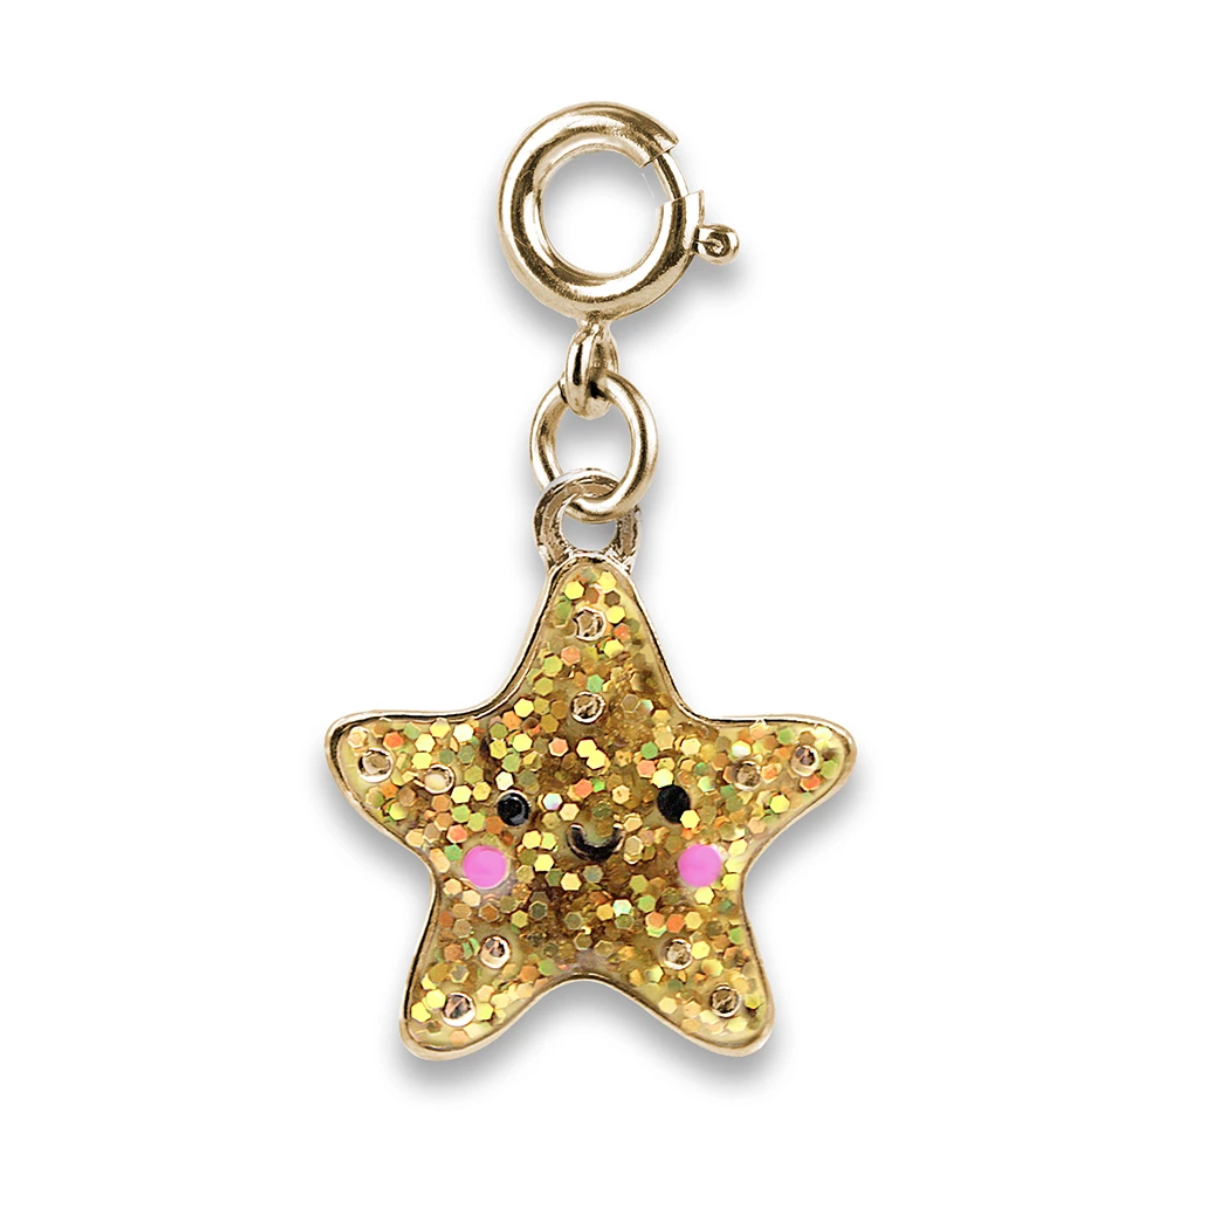 Charm It - Gold Glitter Star Fish Charm-Dress-Up-Charm It!-Yellow Springs Toy Company